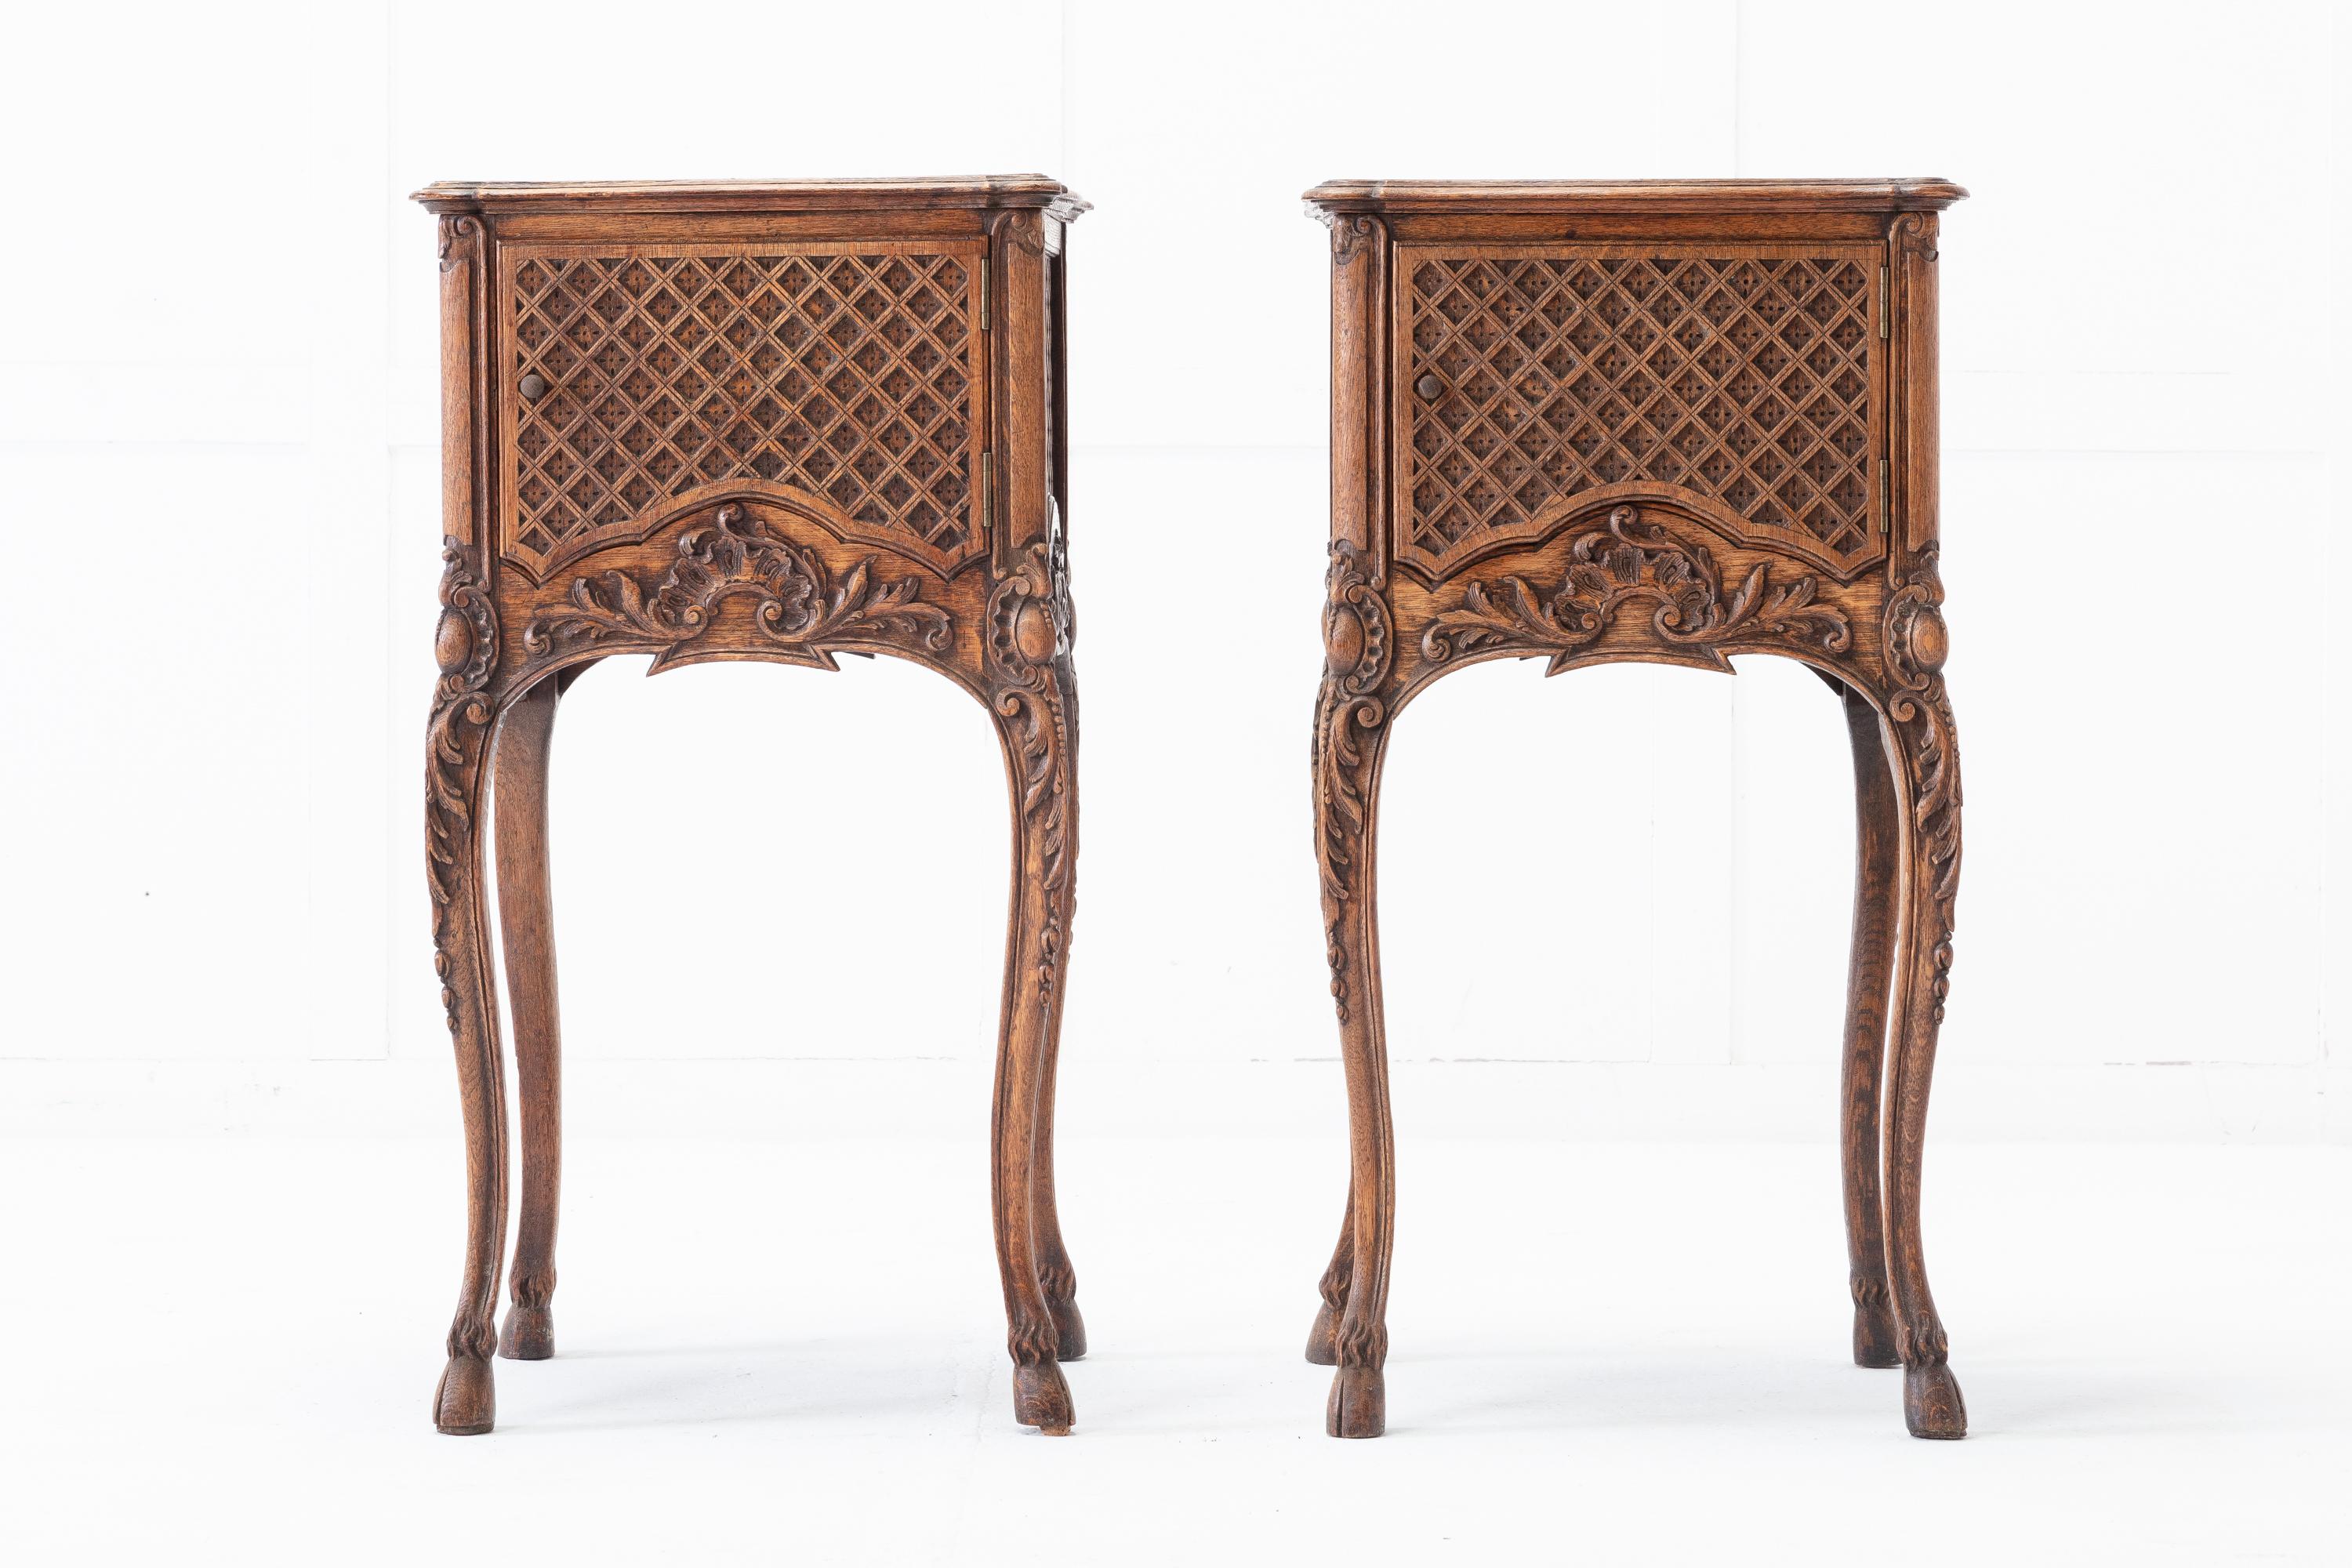 A great quality pair of 19th century French oak bedside tables with marble tops. Having moulded tops inset with original red and white veined marble. The cupboards below feature intricate lattice work carving, that continues on all sides, which is